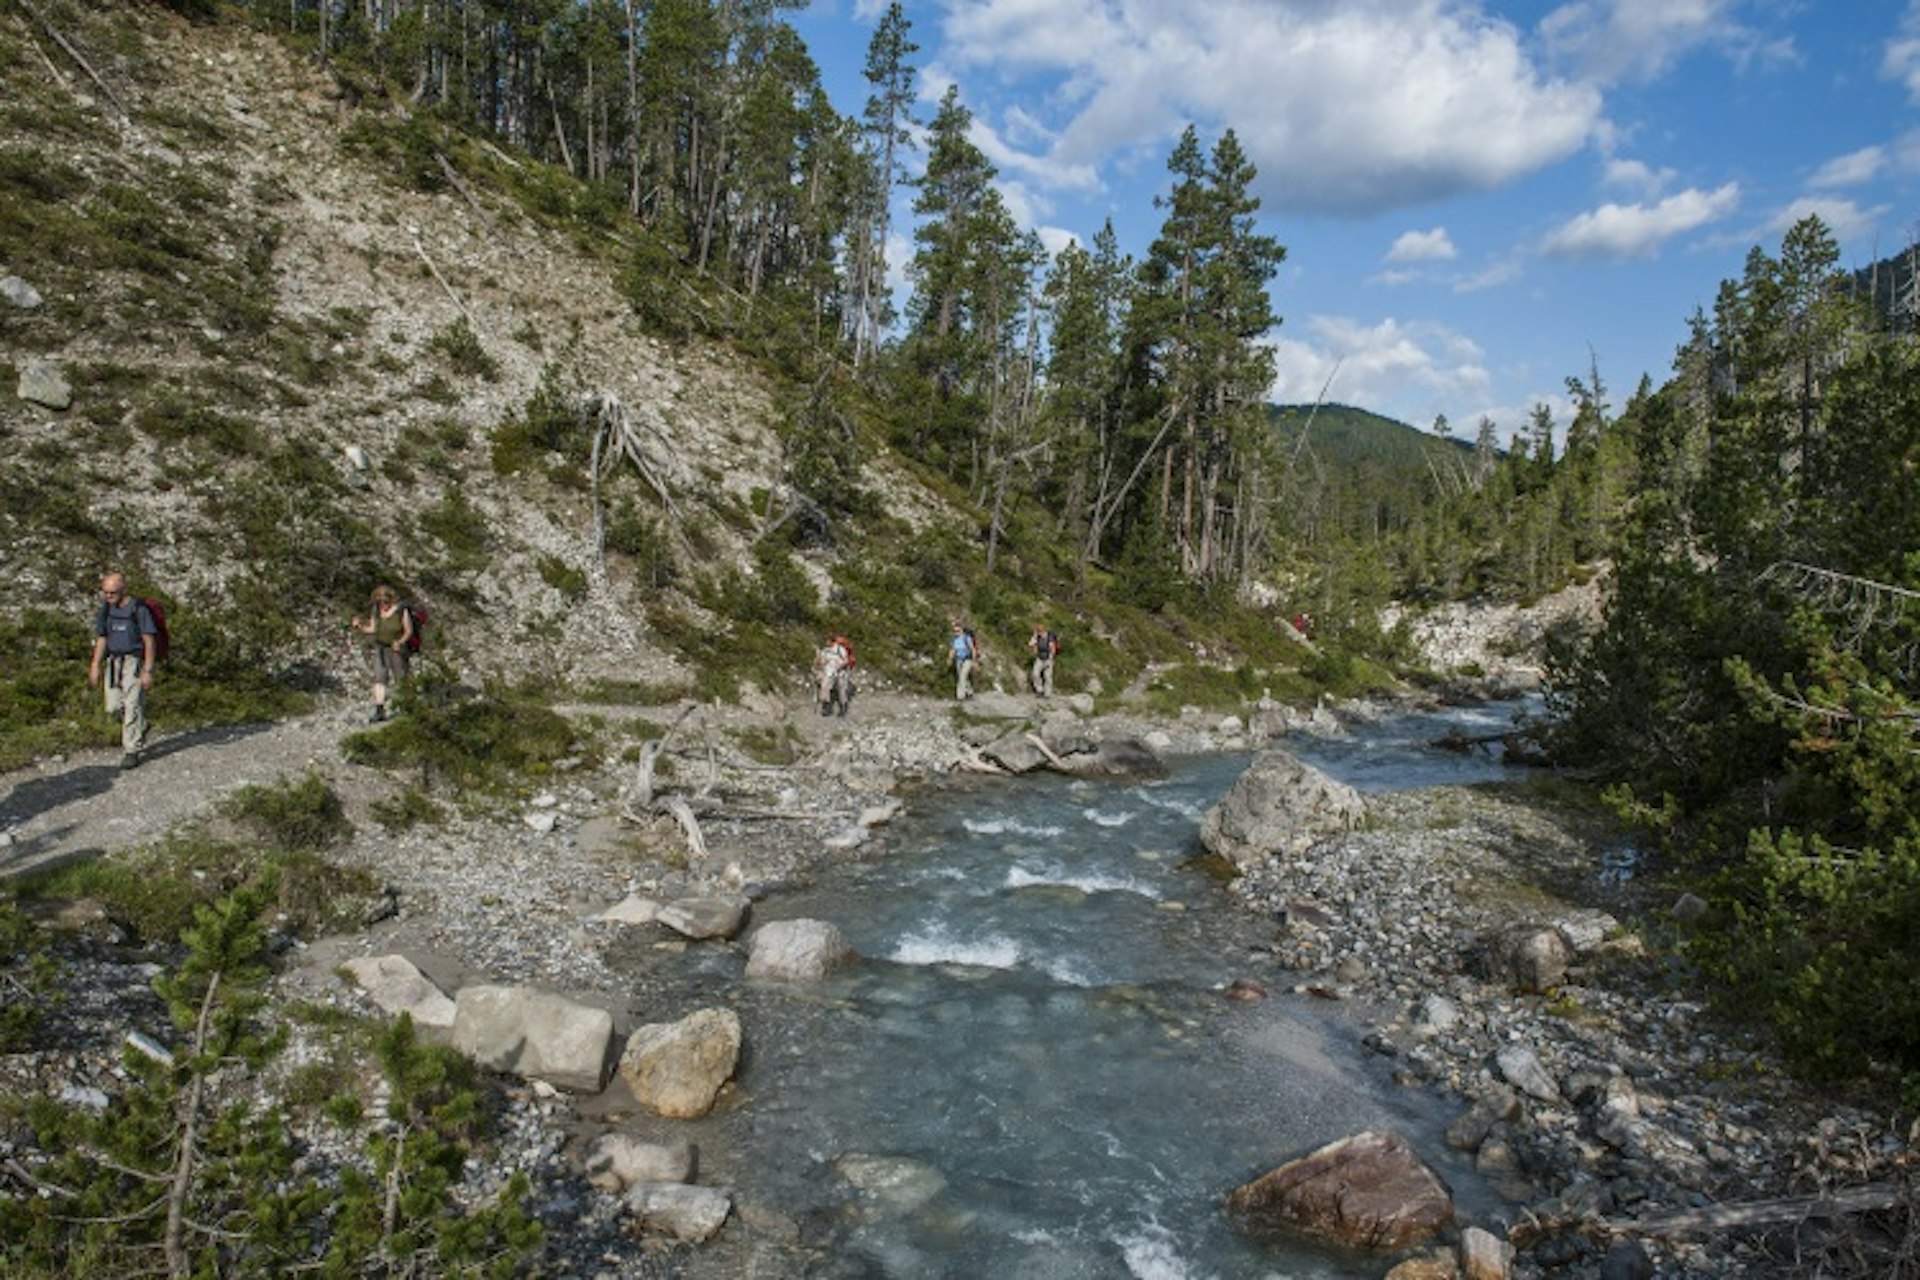 Hiking along a stream in the Fourn. Image courtesy of the Swiss National Park.